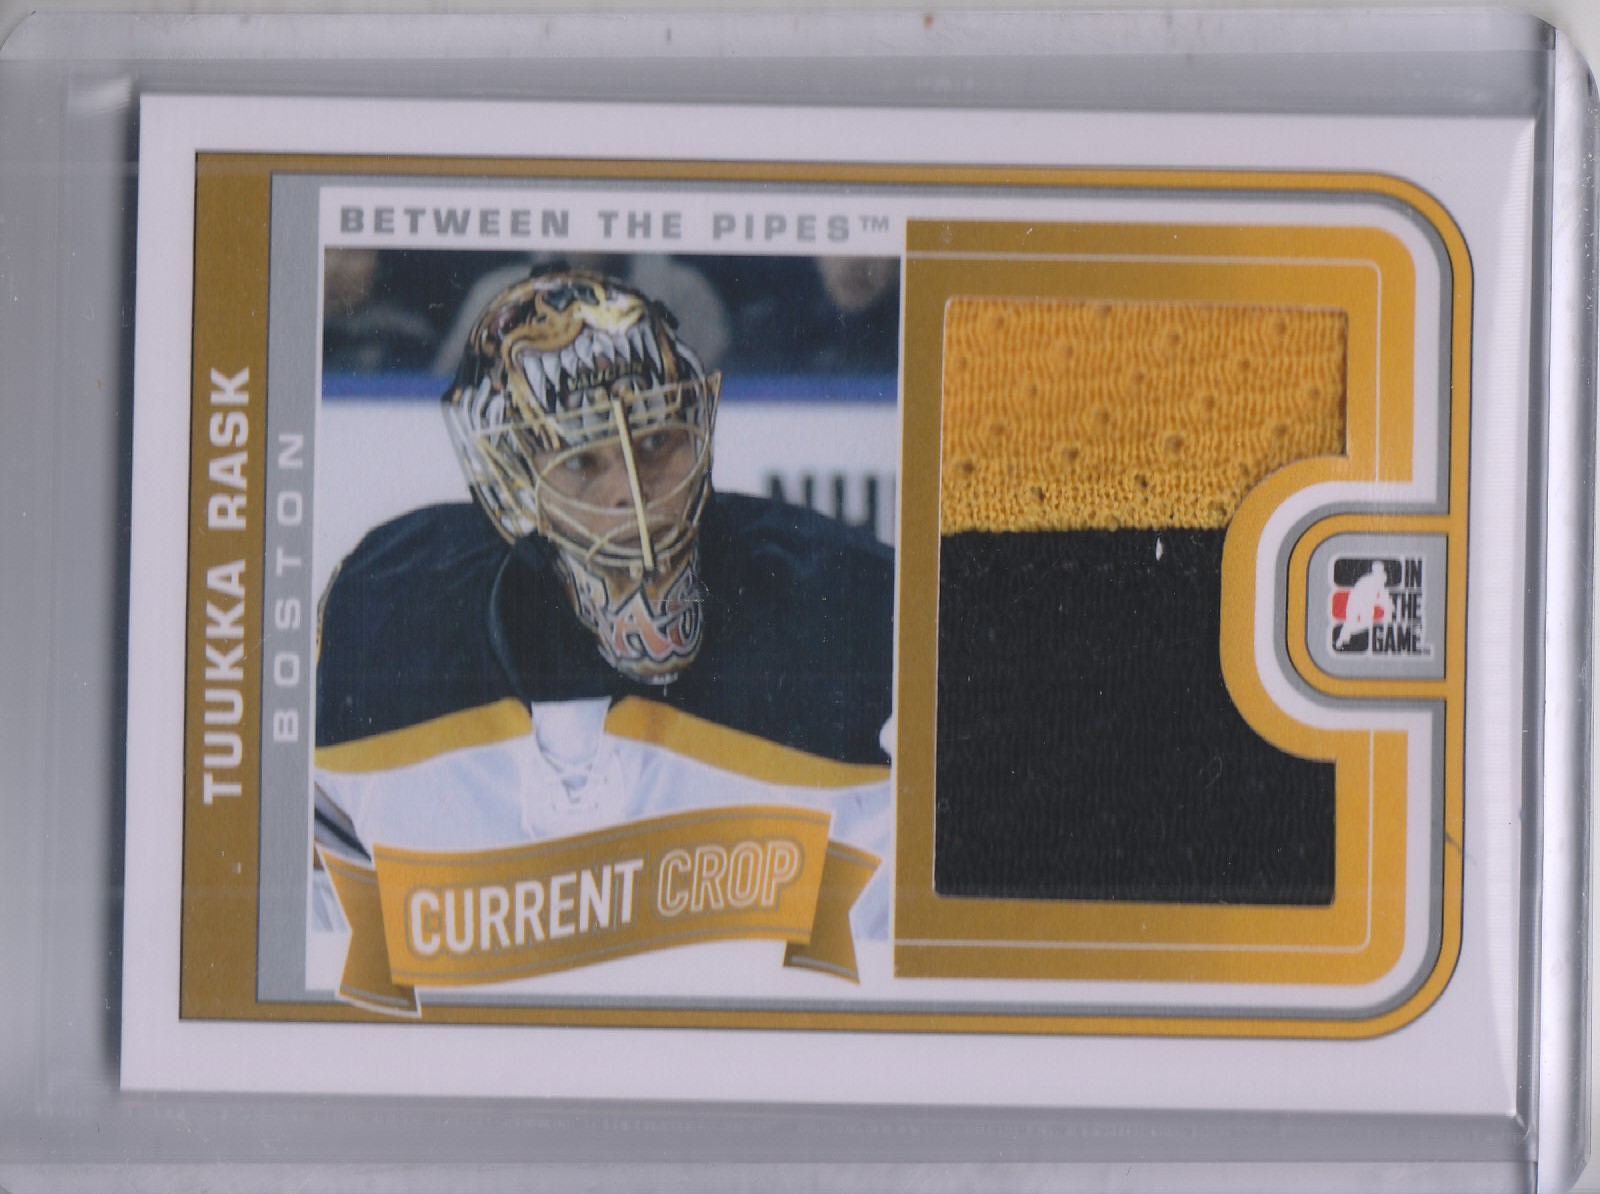 2013-14 Between the Pipes Current Crop Jerseys Silver #CC08 Tuukka Rask